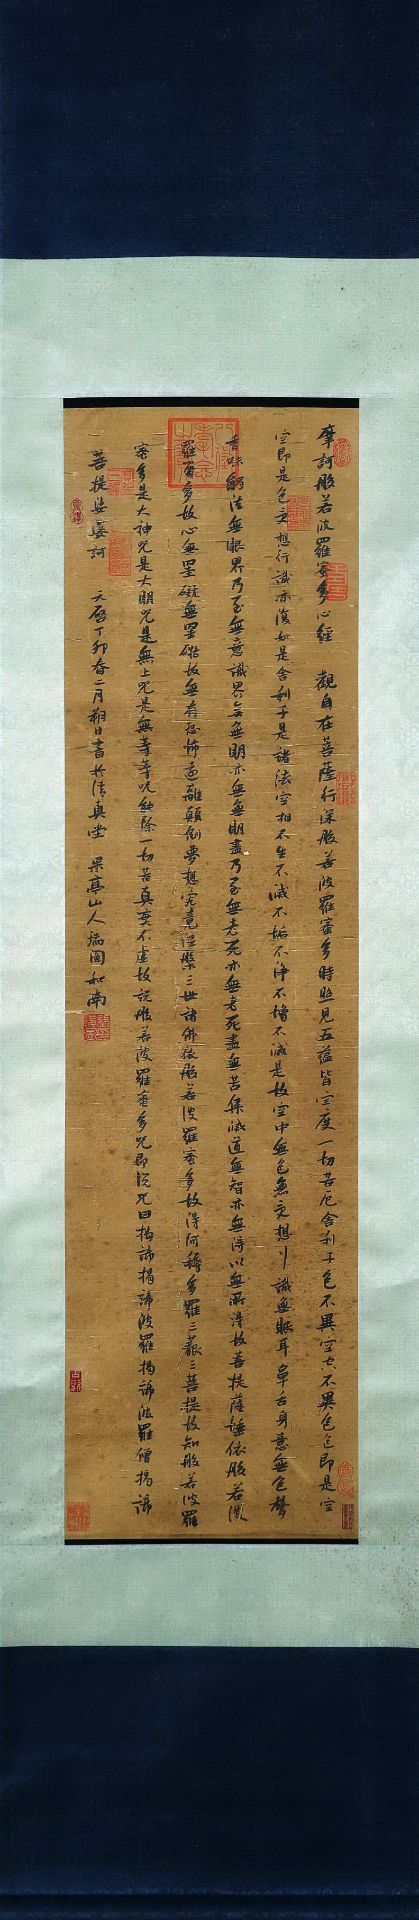 A Chinese Scroll Calligraphy By Zhang Ruitu - Image 8 of 12